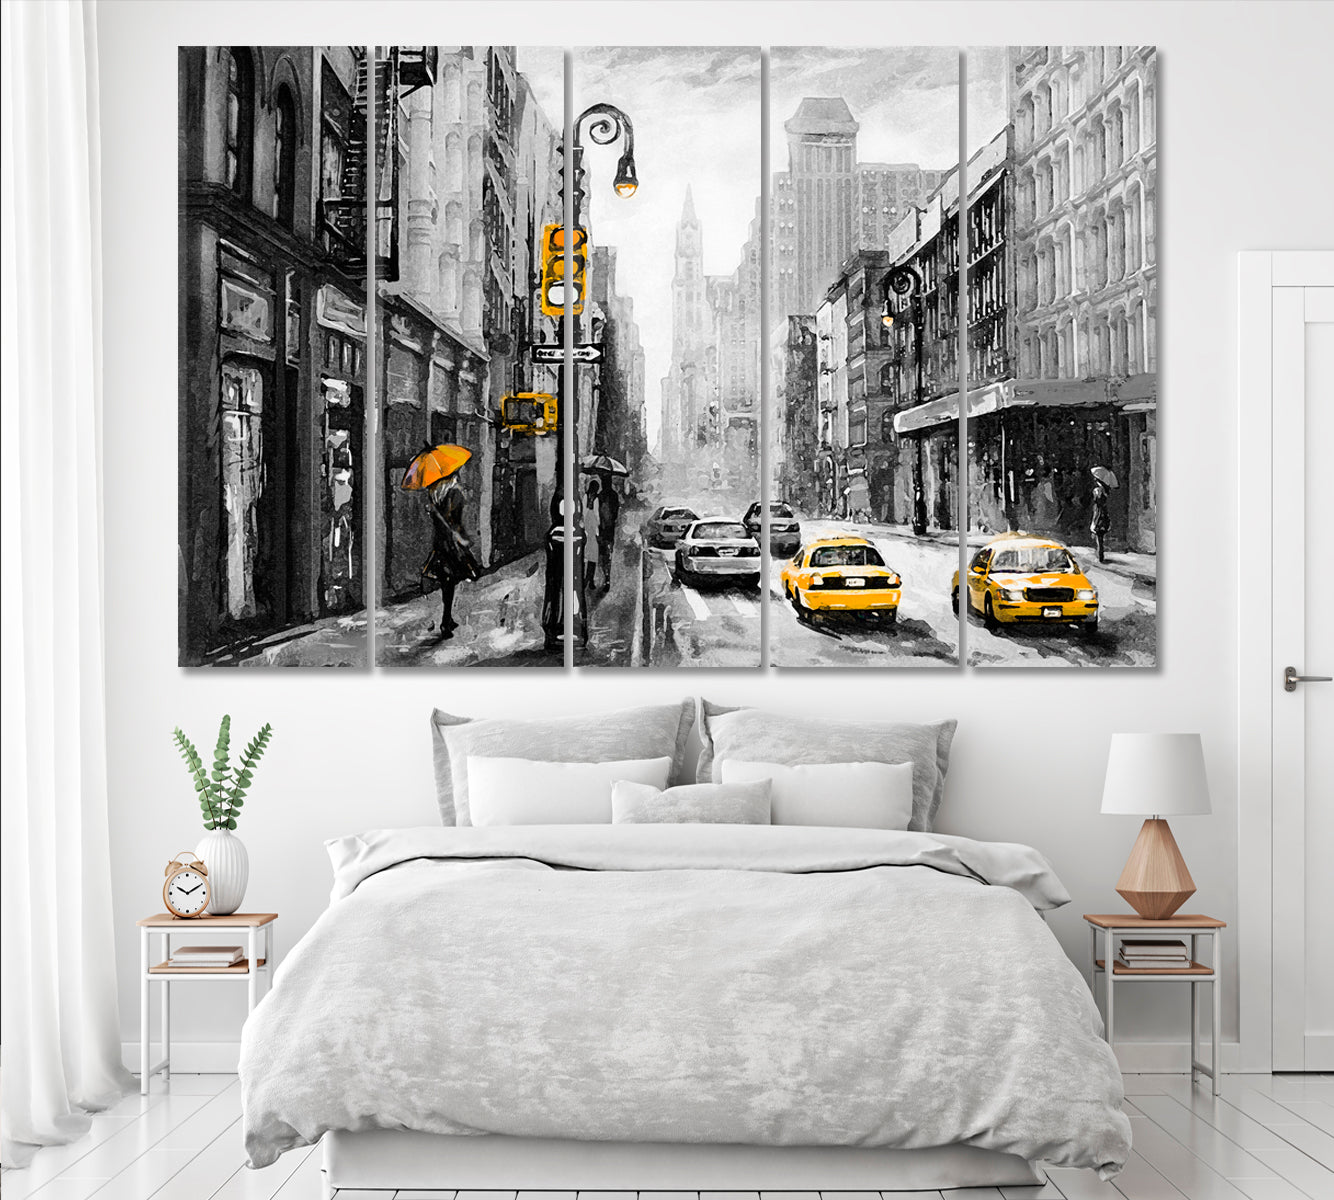 New York with Yellow Taxi Canvas Print ArtLexy 5 Panels 36"x24" inches 